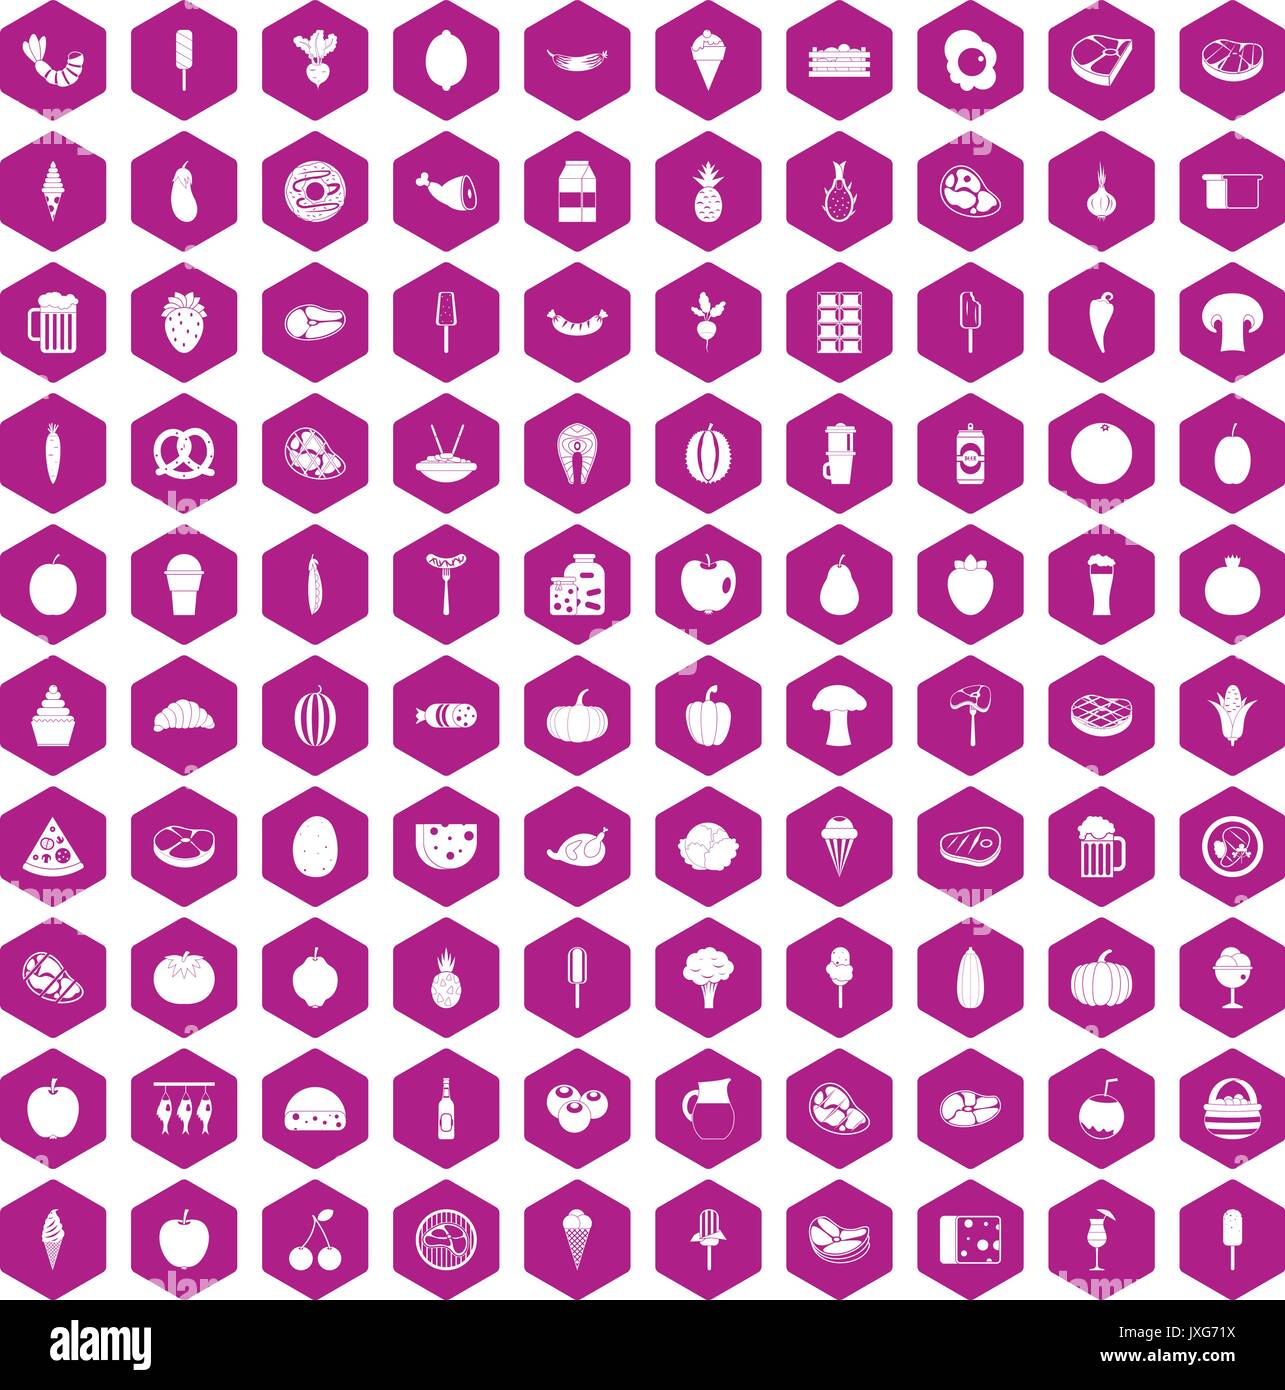 100 food icons hexagon violet Stock Vector